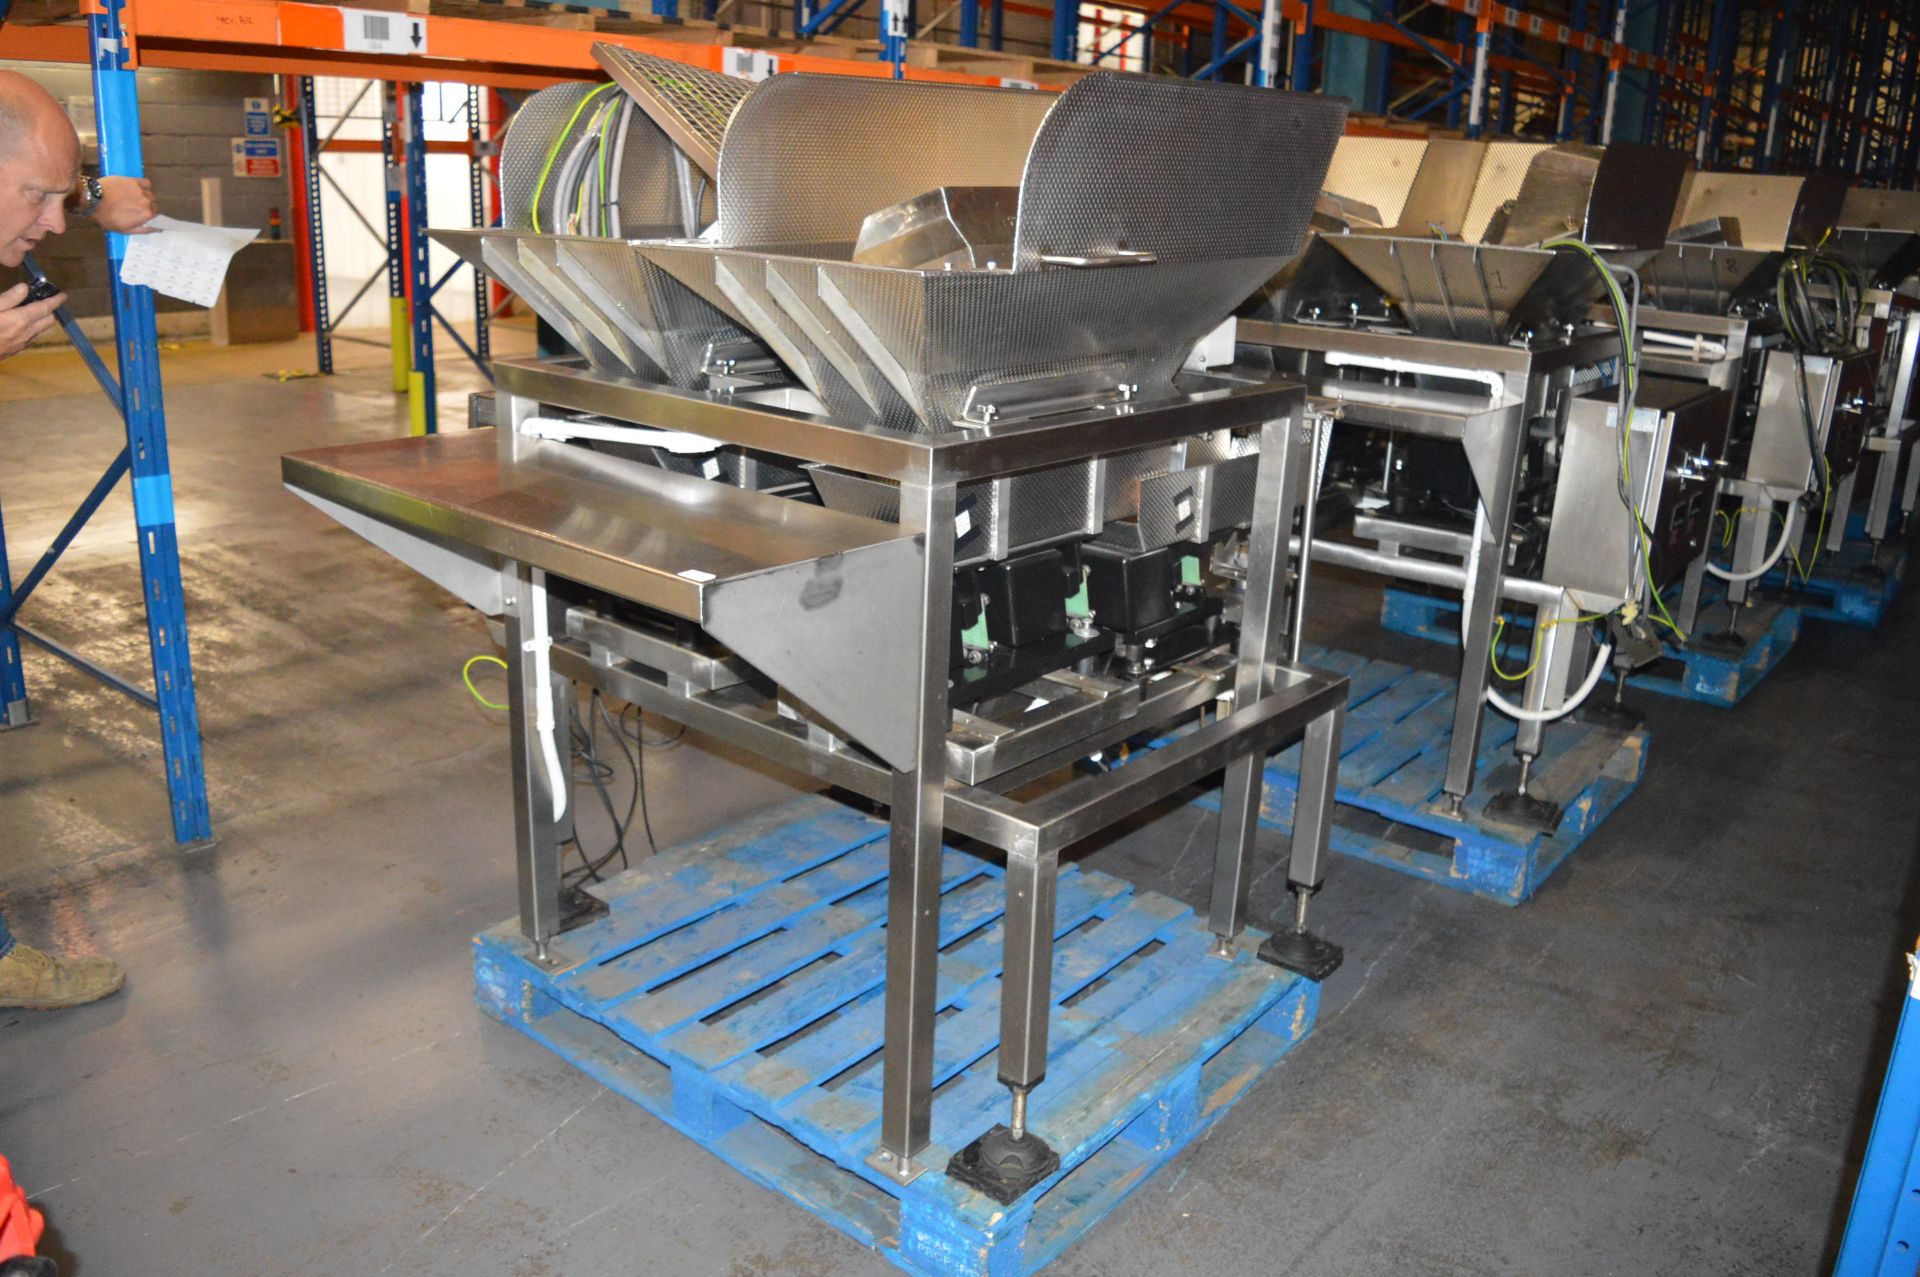 *Ancholme Machine Co. Ltd Twin Weigher and Dispenser Model: Linear, YoM: 2005, Serial No. 3927C